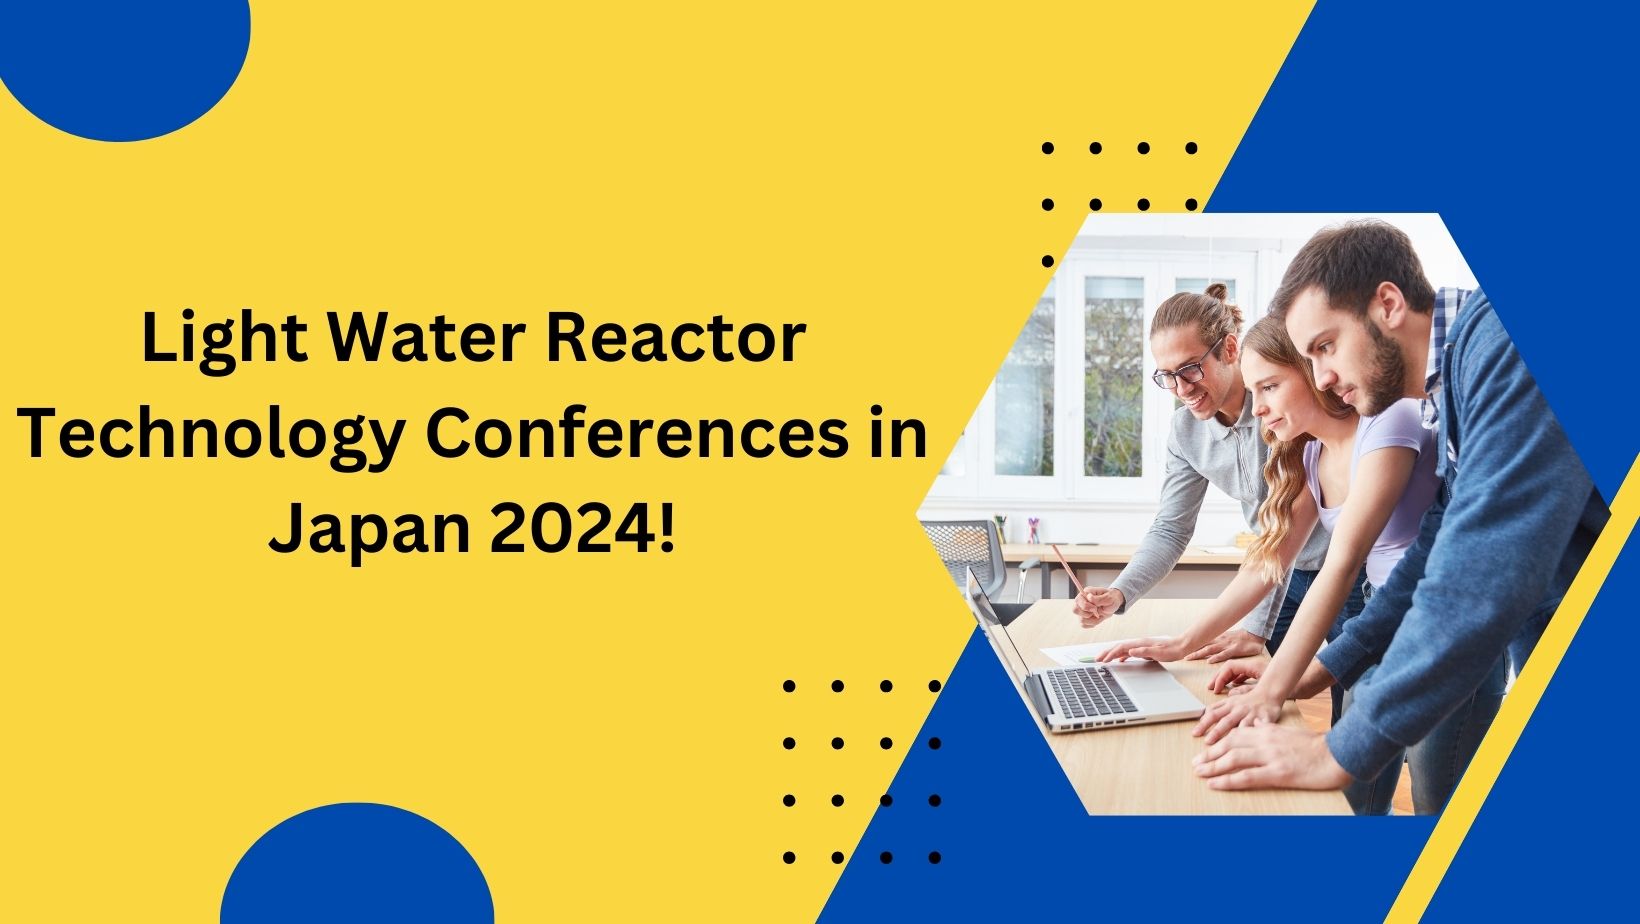 Light Water Reactor Technology Conferences